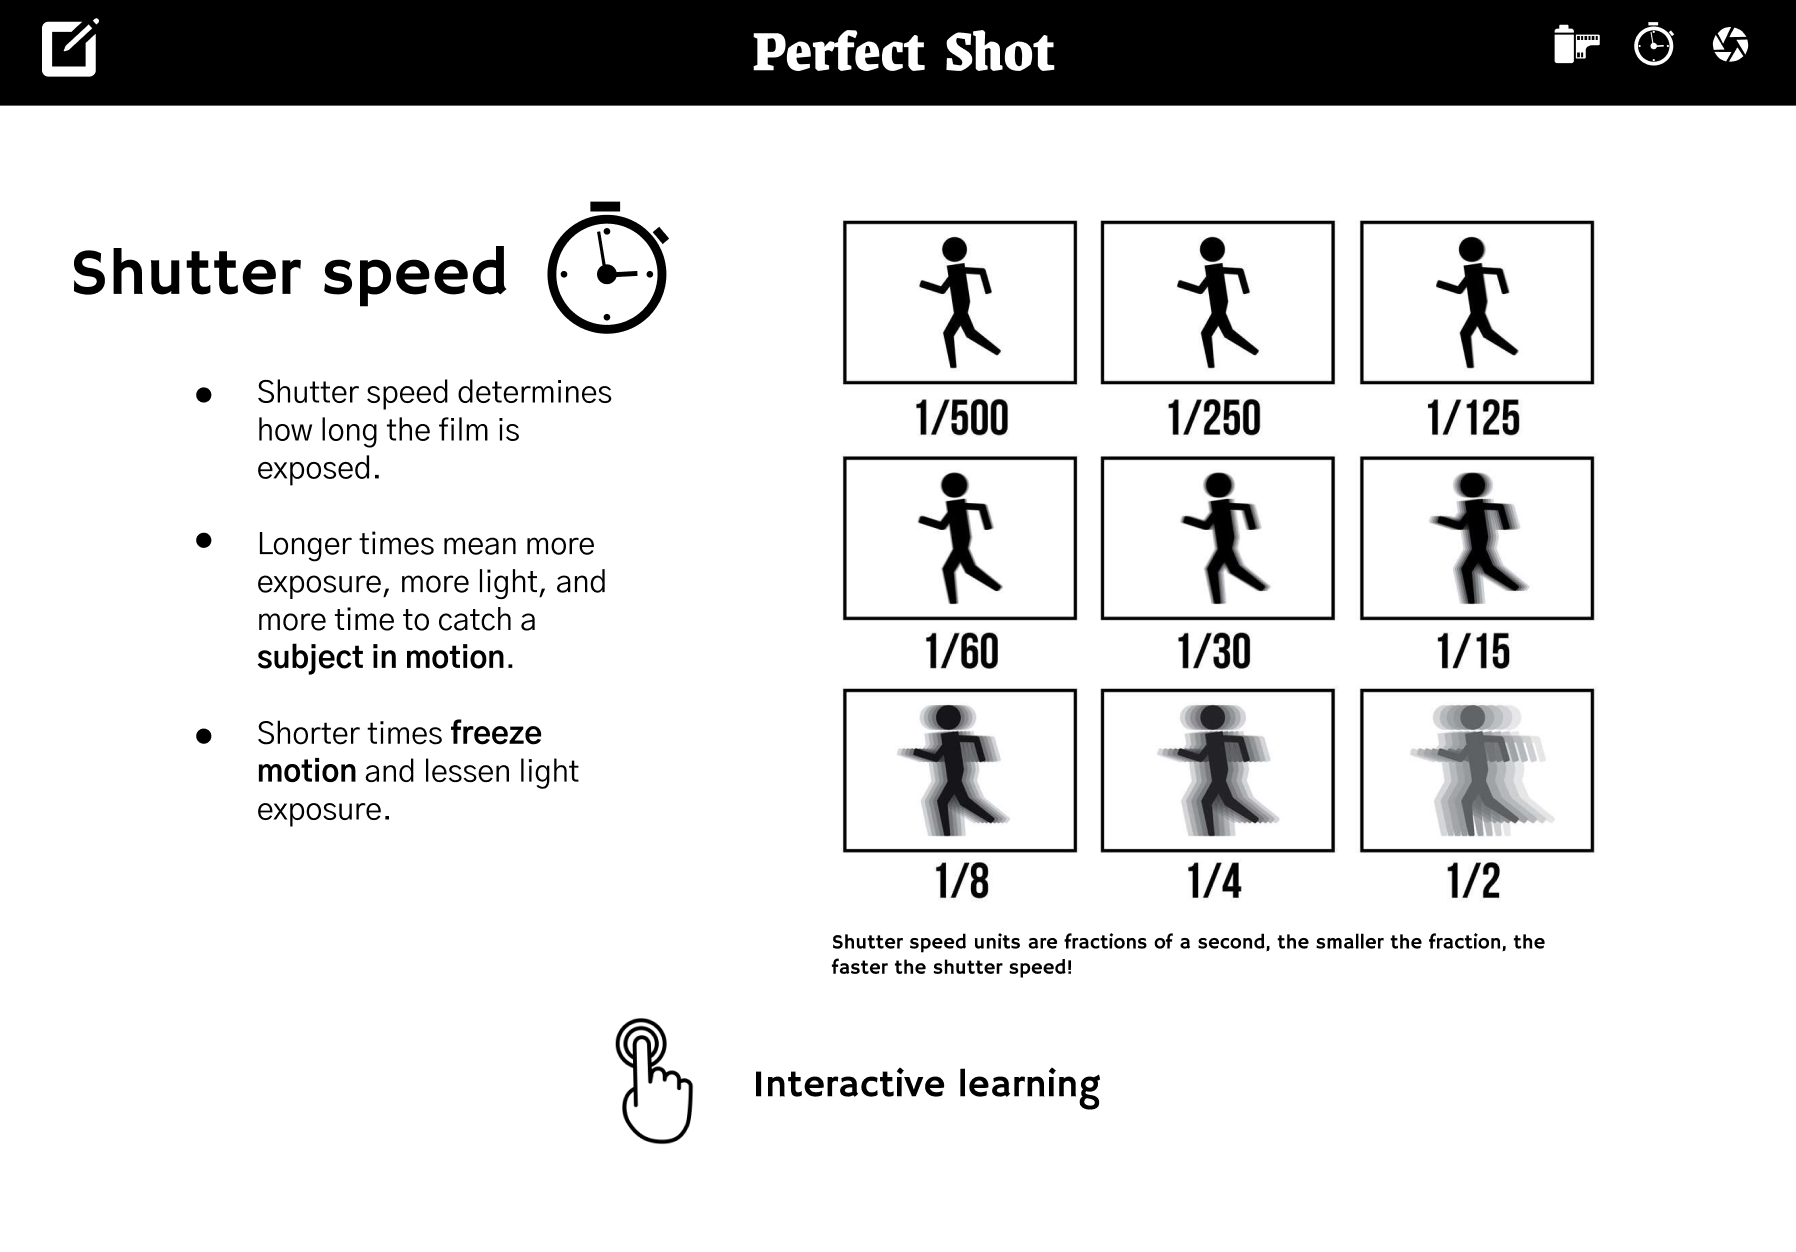 Perfect shot shutter speed page.